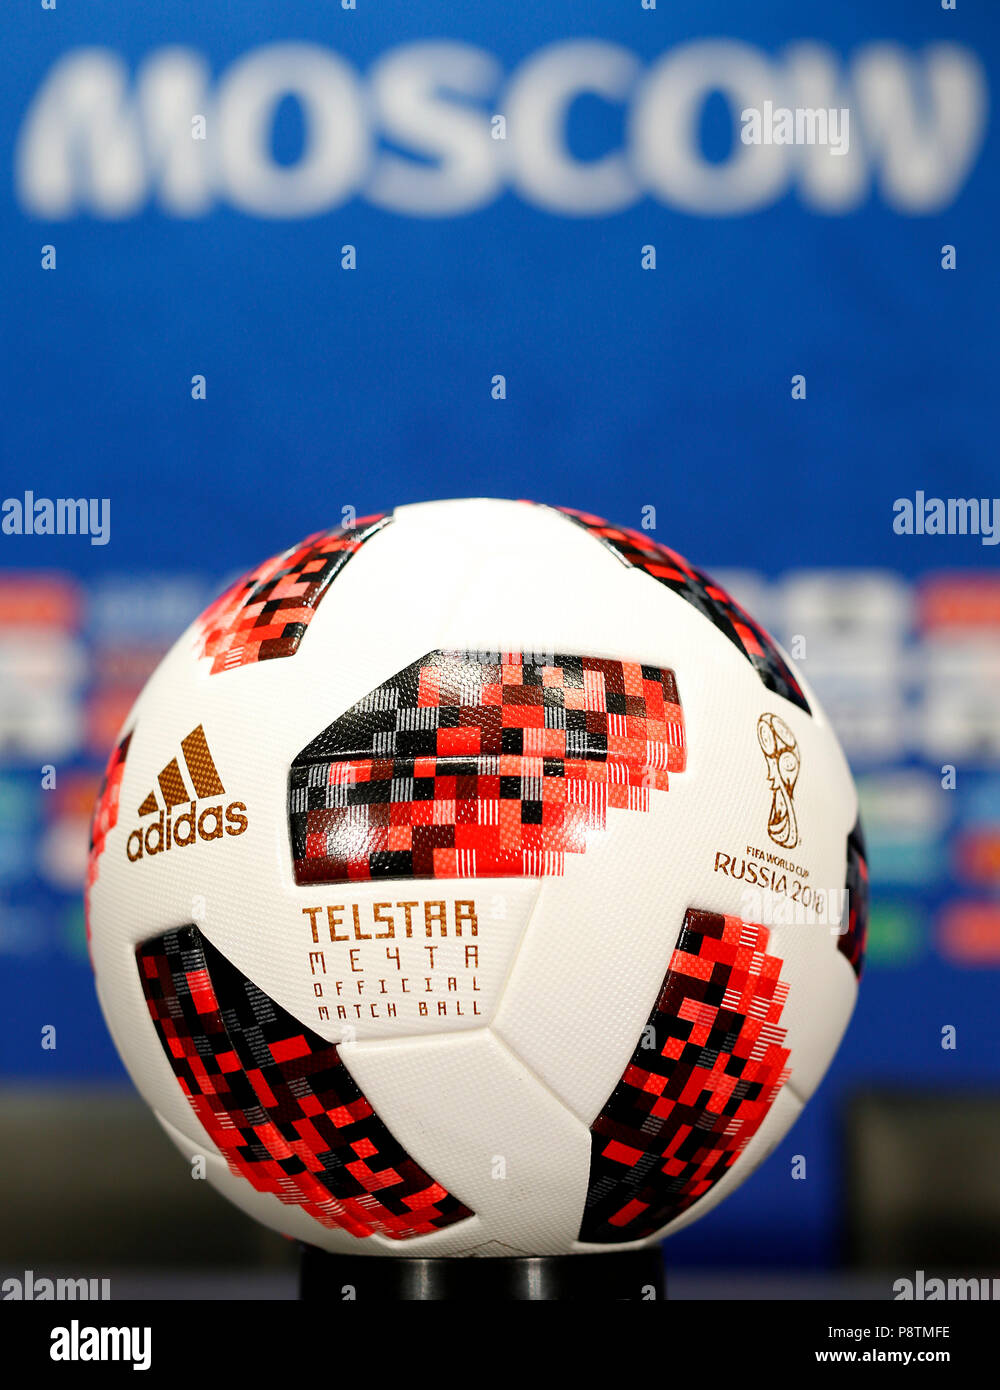 Adidas telstar High Resolution Stock Photography and Images - Alamy